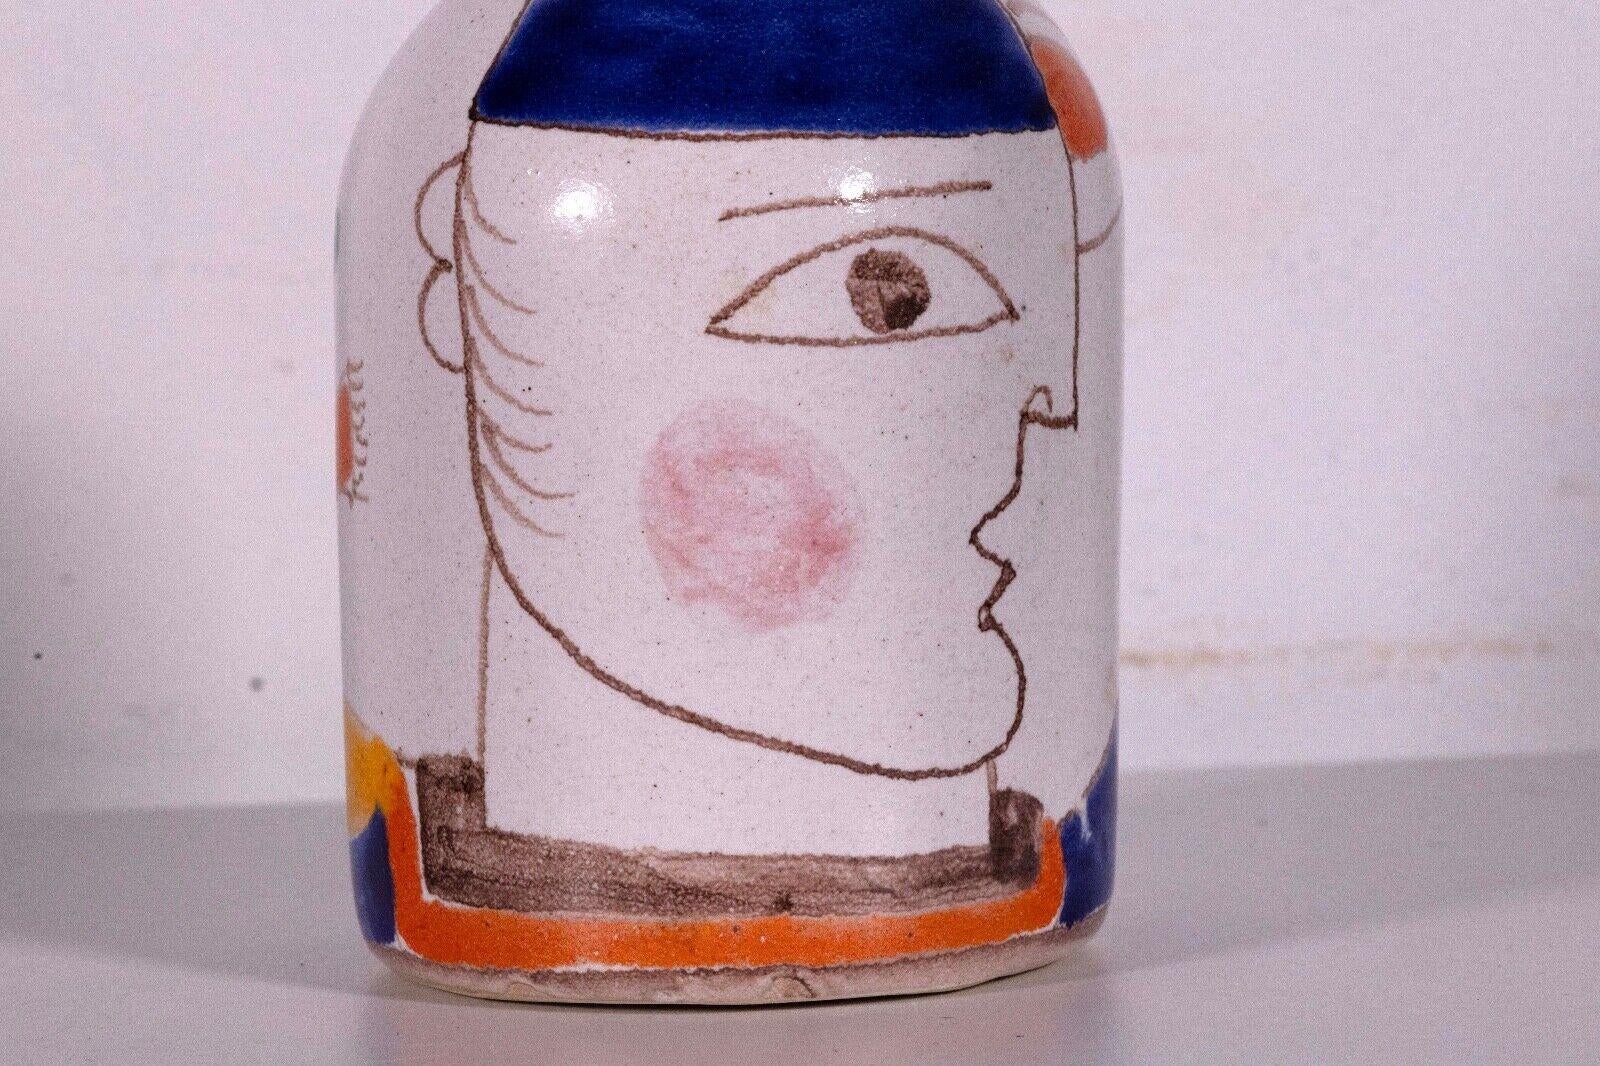 Desimonte Italy Signed Ceramic Face Design Hand Painted Mid Century Modern Vase For Sale 3